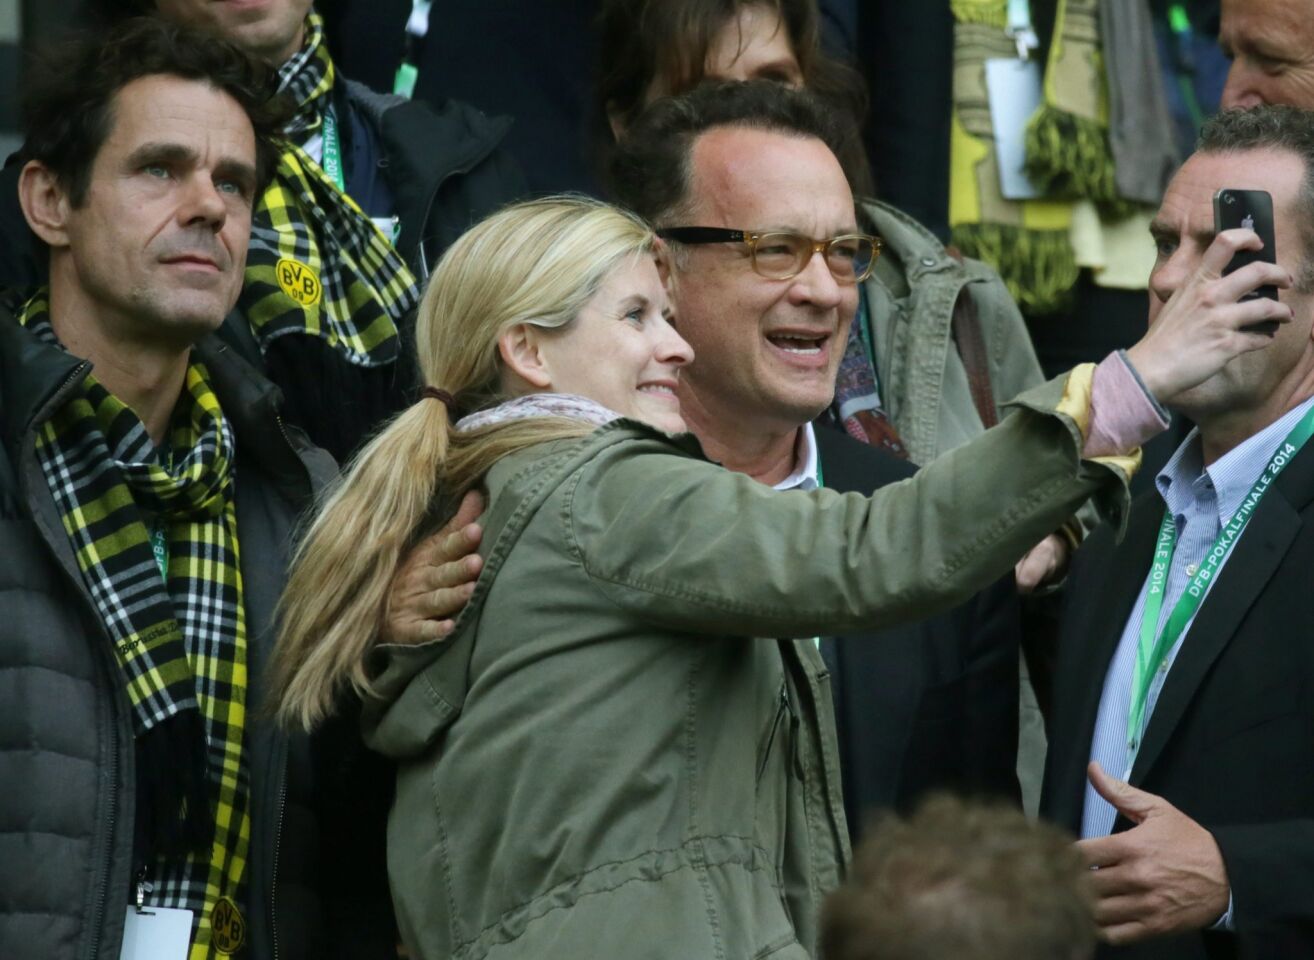 Actor Tom Hanks and a young woman take a selfie as director Tom Tykwer, left, looks on at the DFB Cup final between Borussia Dortmund and FC Bayern Munich at the Olympic Stadium in Berlin on May 17, 2014.